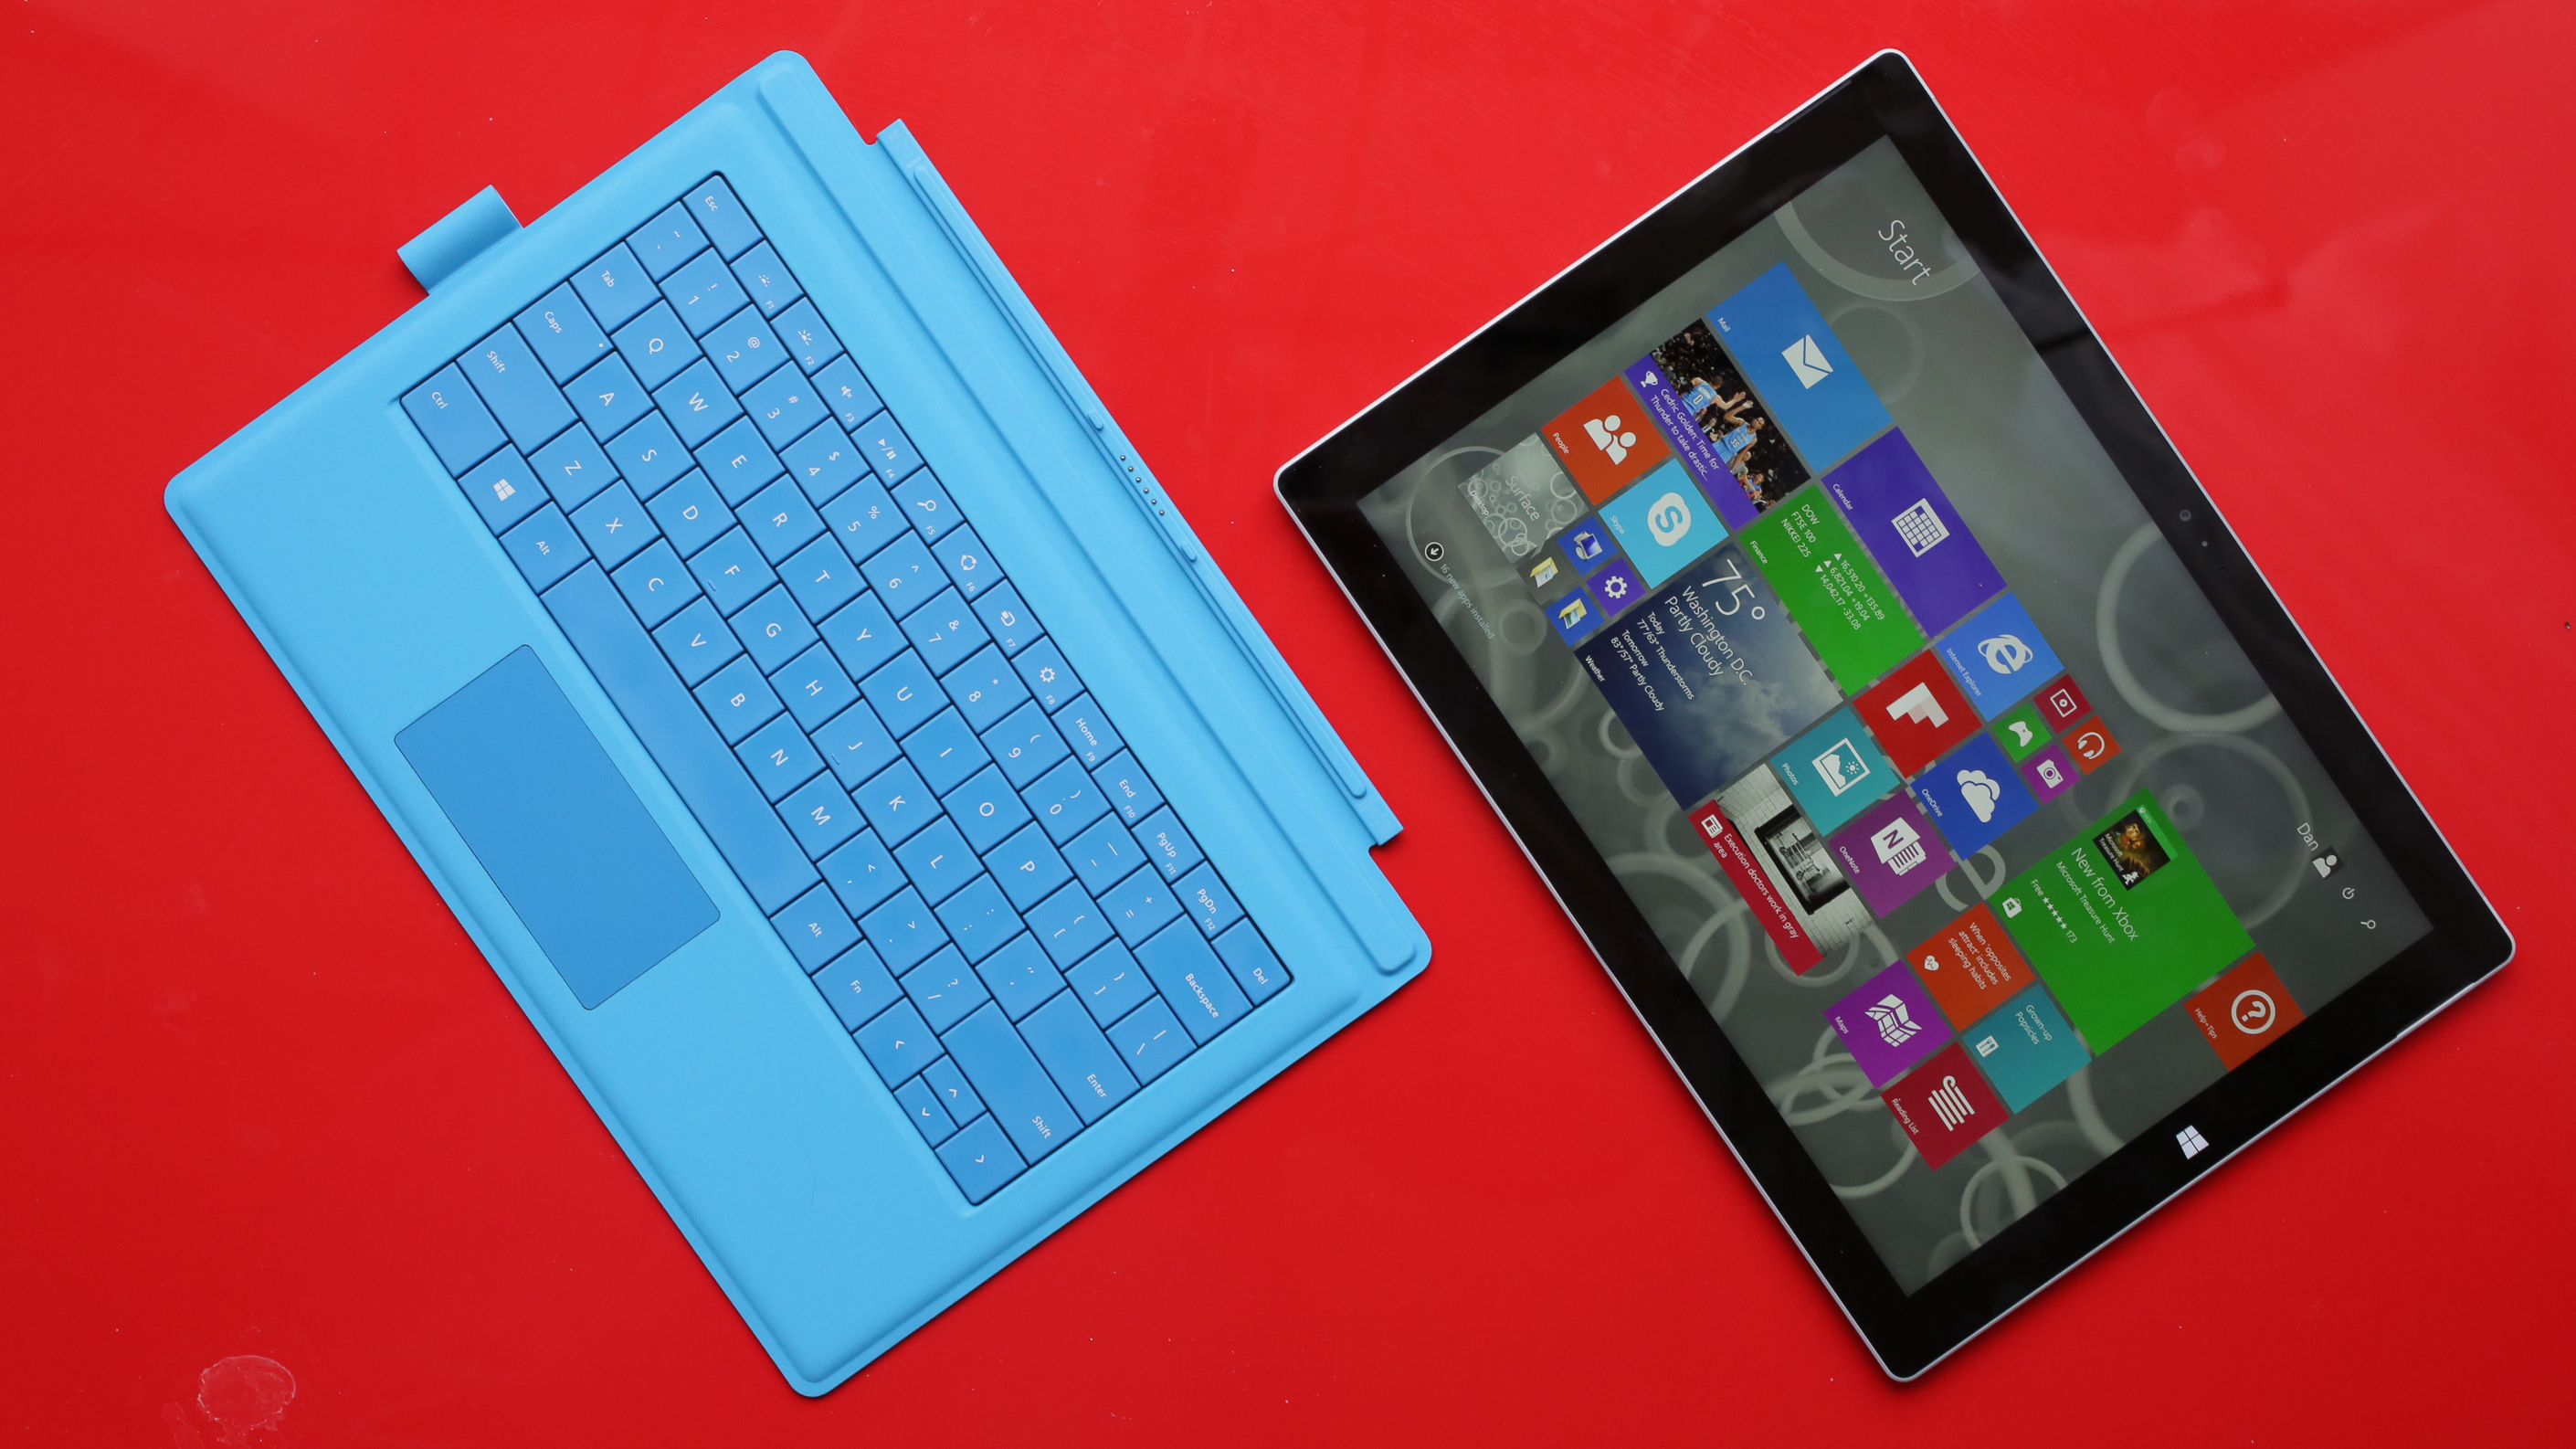 Microsoft Surface Pro 3 review: The best Surface yet is more than 